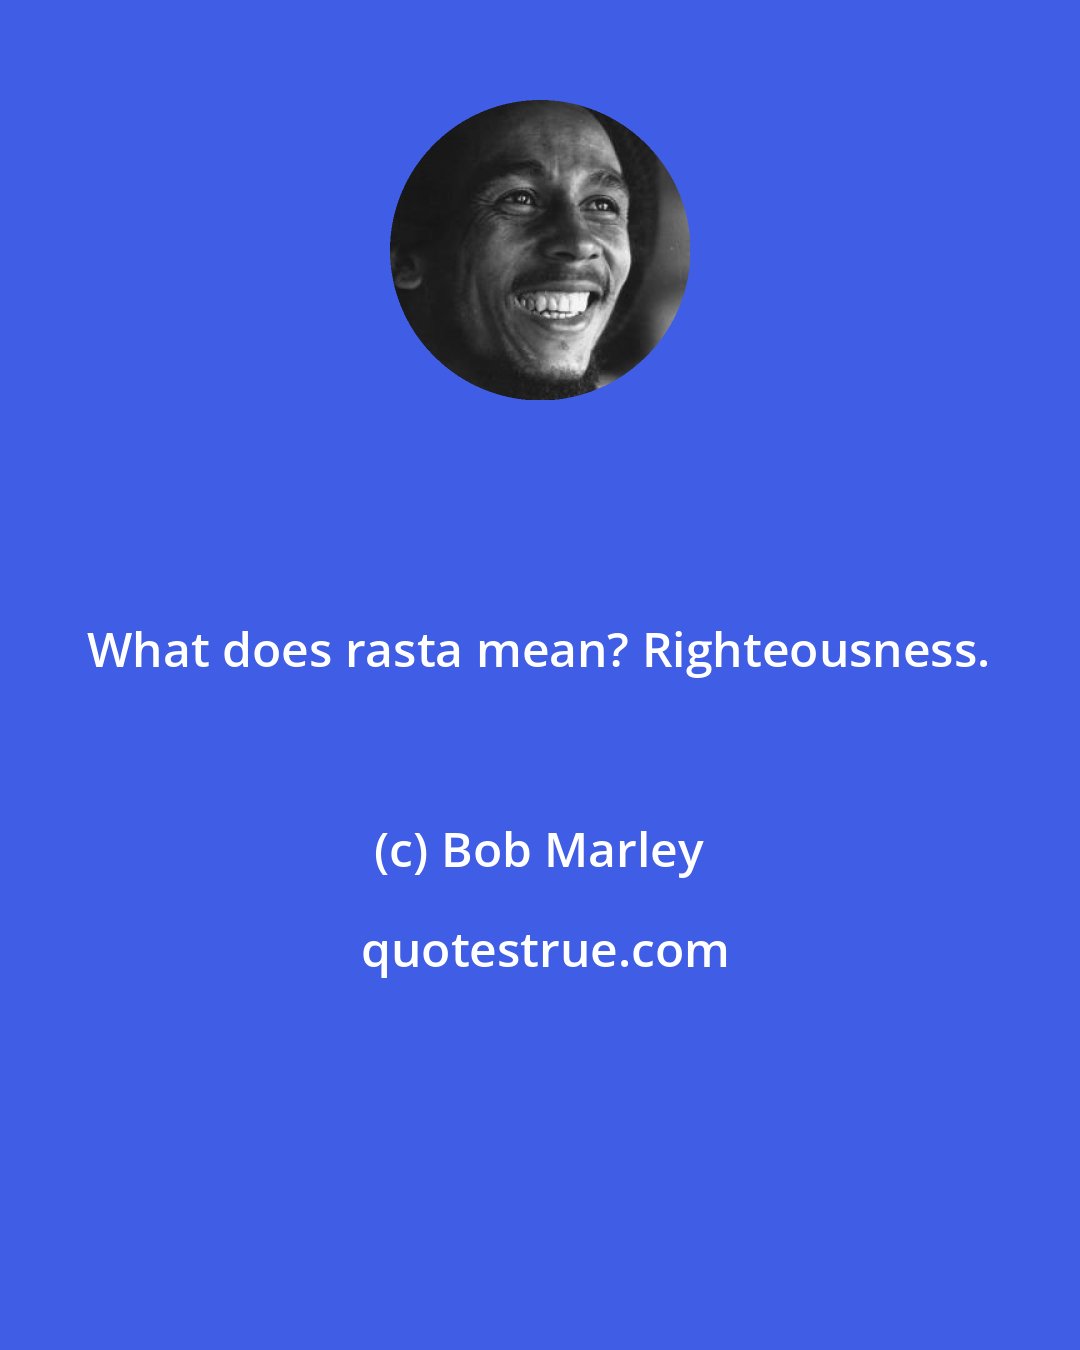 Bob Marley: What does rasta mean? Righteousness.